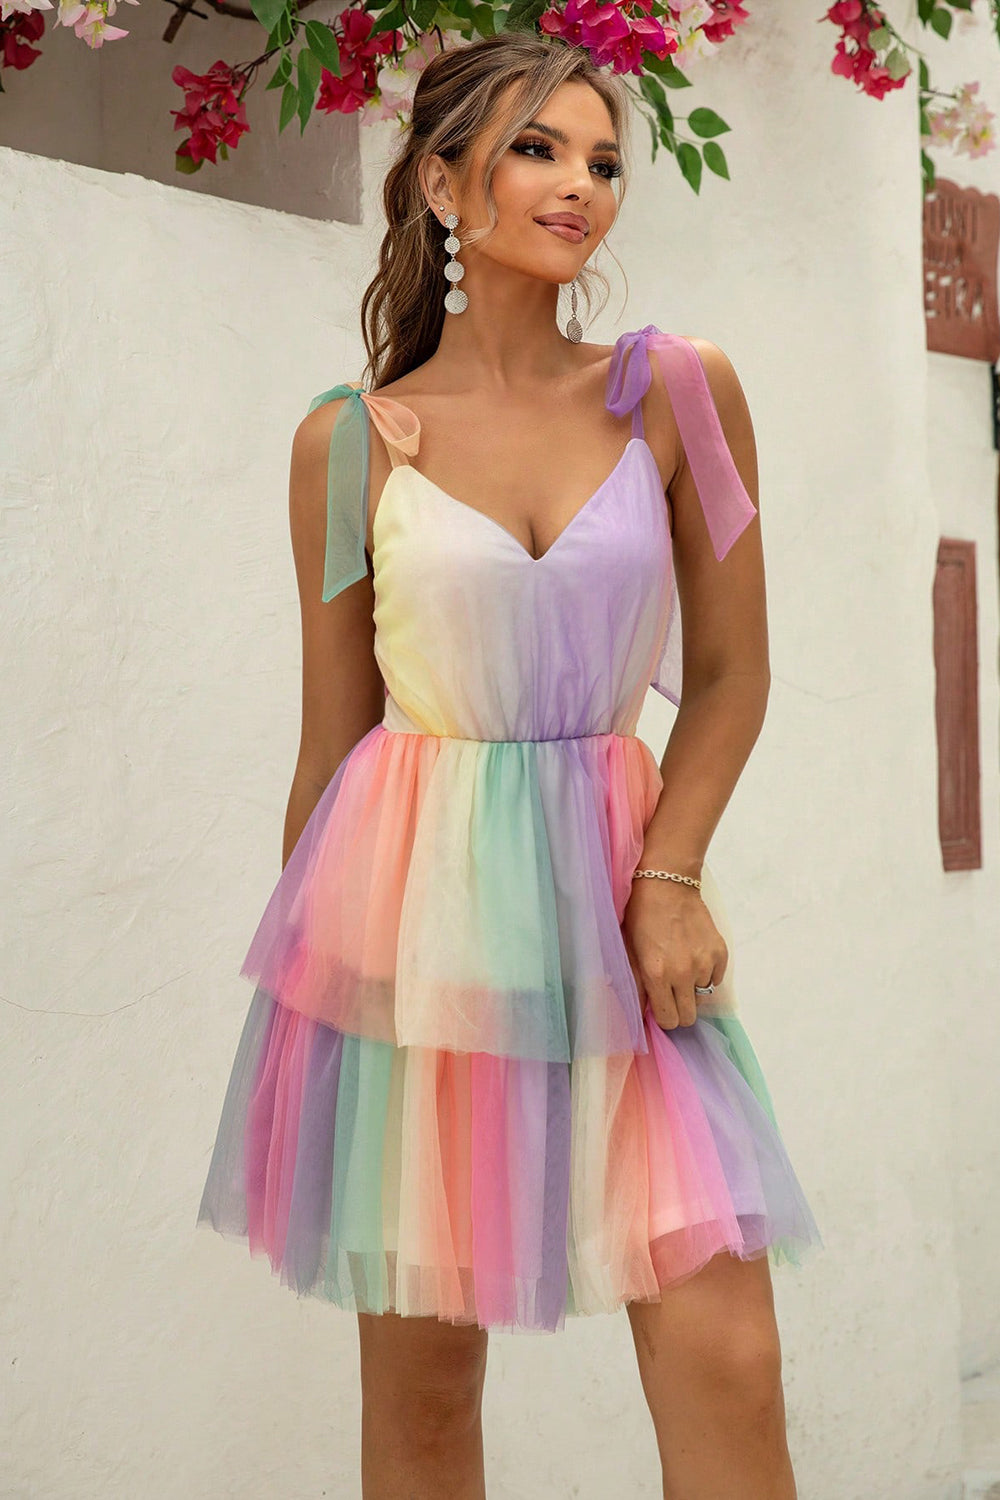 Celebrate in style with our Gradient Tie-Shoulder Layered Dress - the perfect choice for LGBT pride outfits. Discover stunning pride clothing to show your colors.